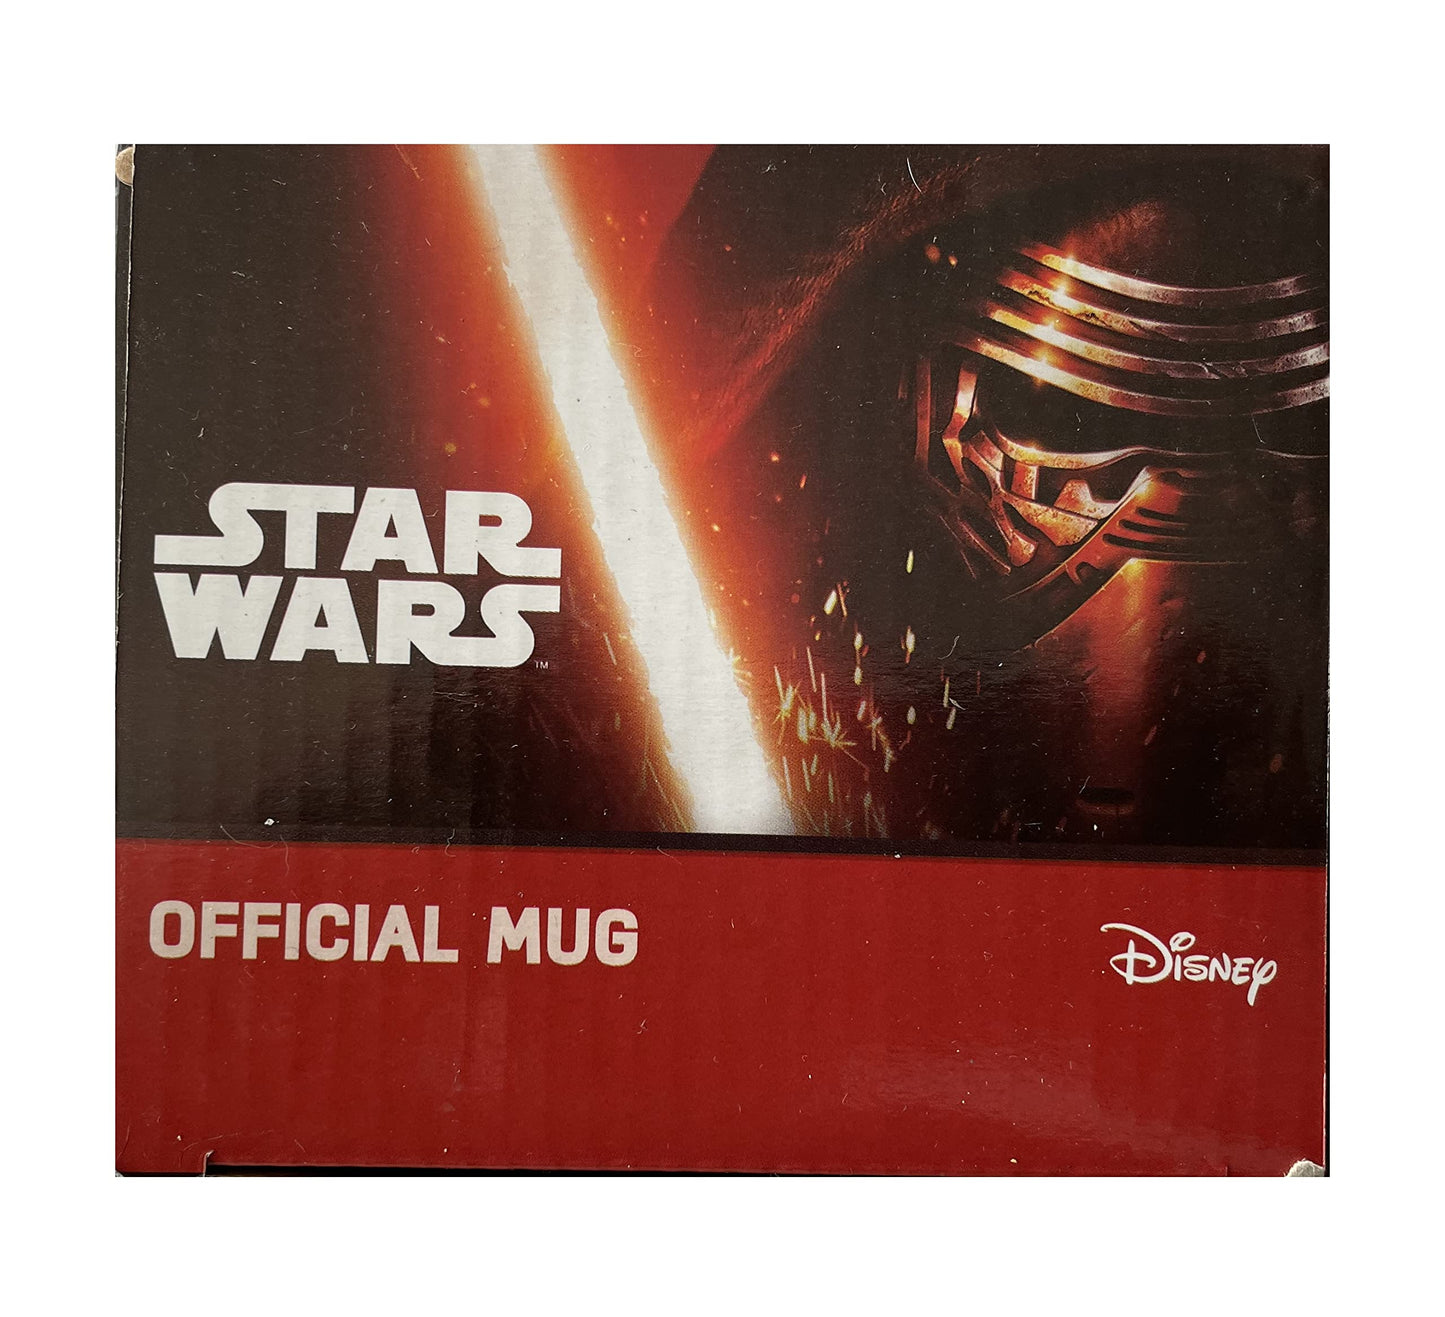 Star Wars 2015 The Force Awakens - The Droids 330ml Ceramic Mug - Brand New Shop Stock Room Find